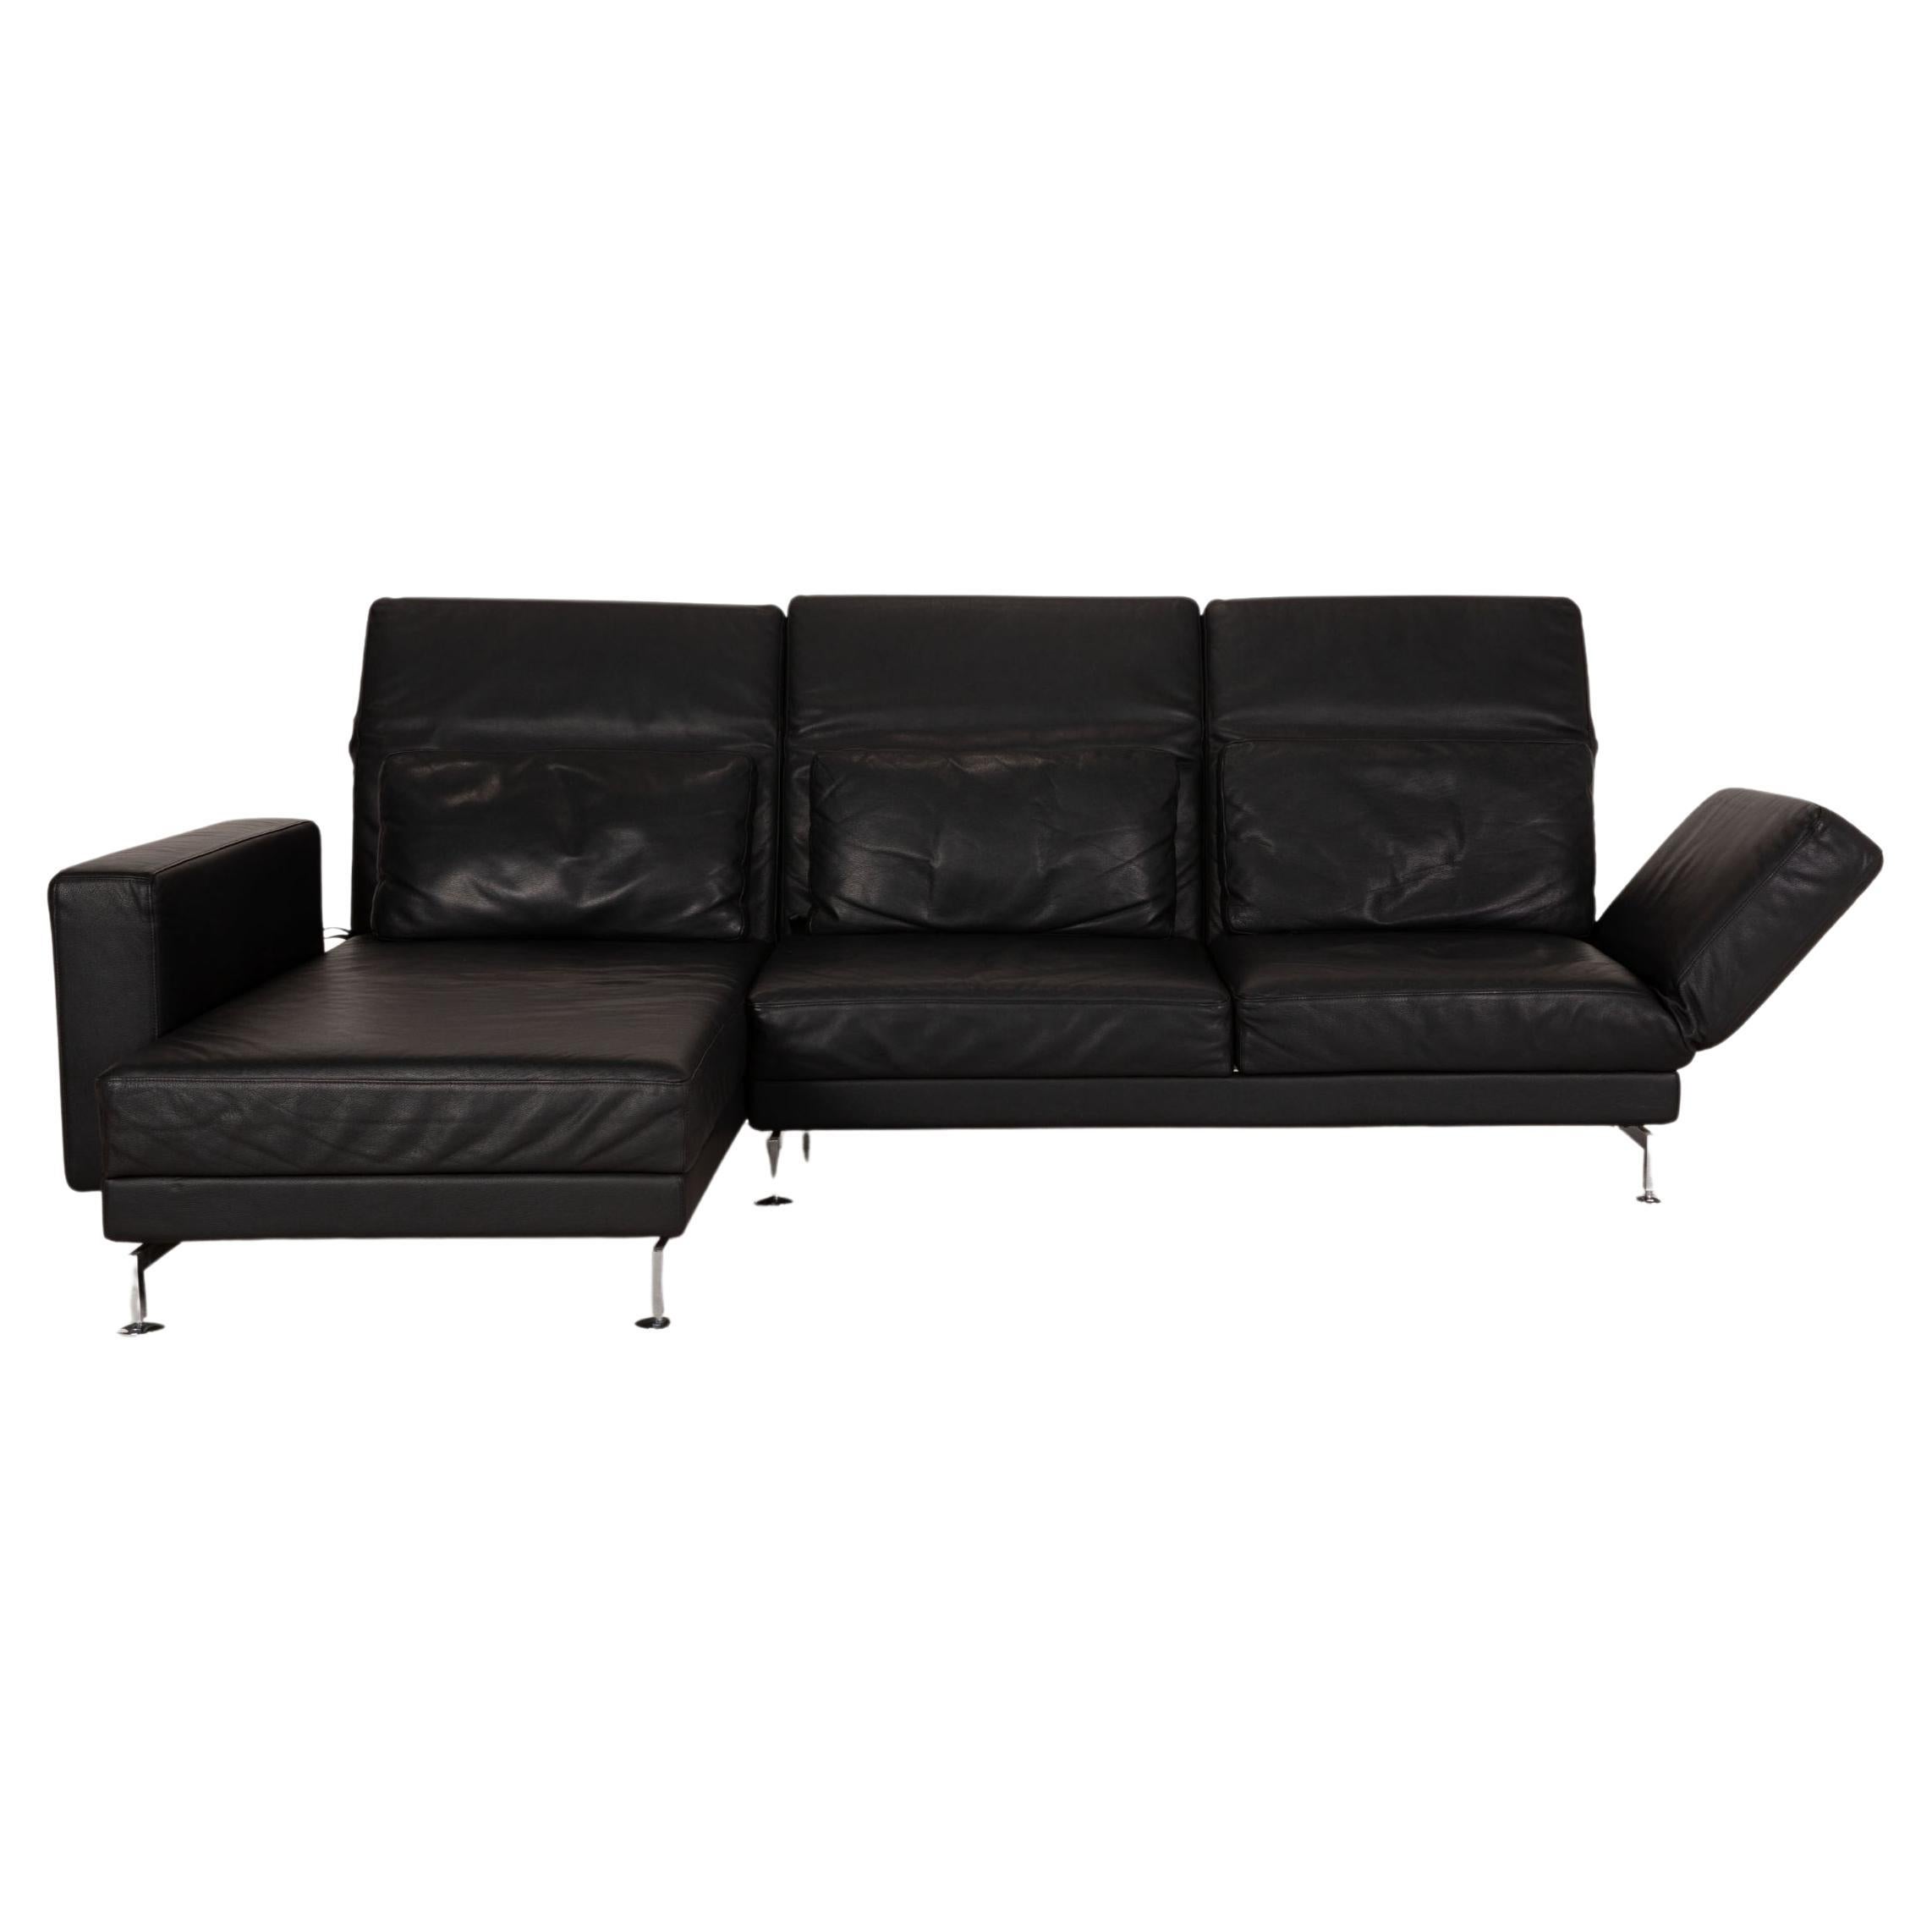 Brühl & Sippold Moule Leather Sofa Black Corner Sofa Couch Function For Sale